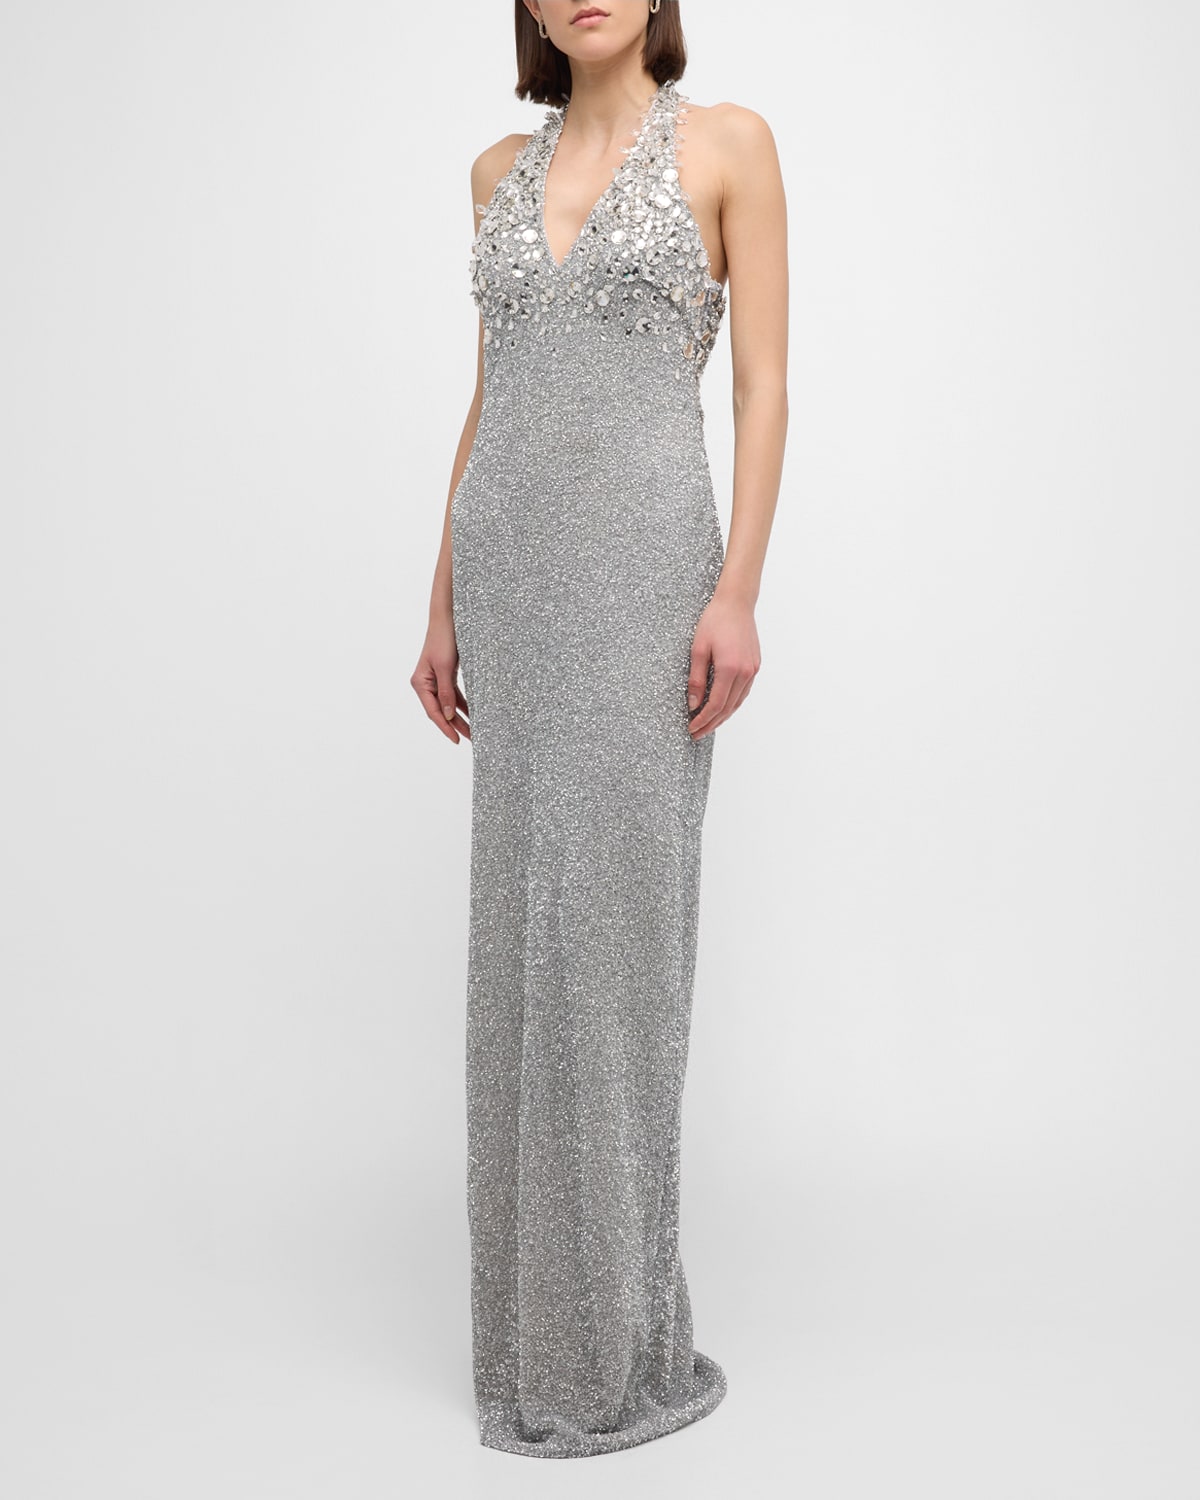 Beaded Halter Gown with Crystal Embellishment